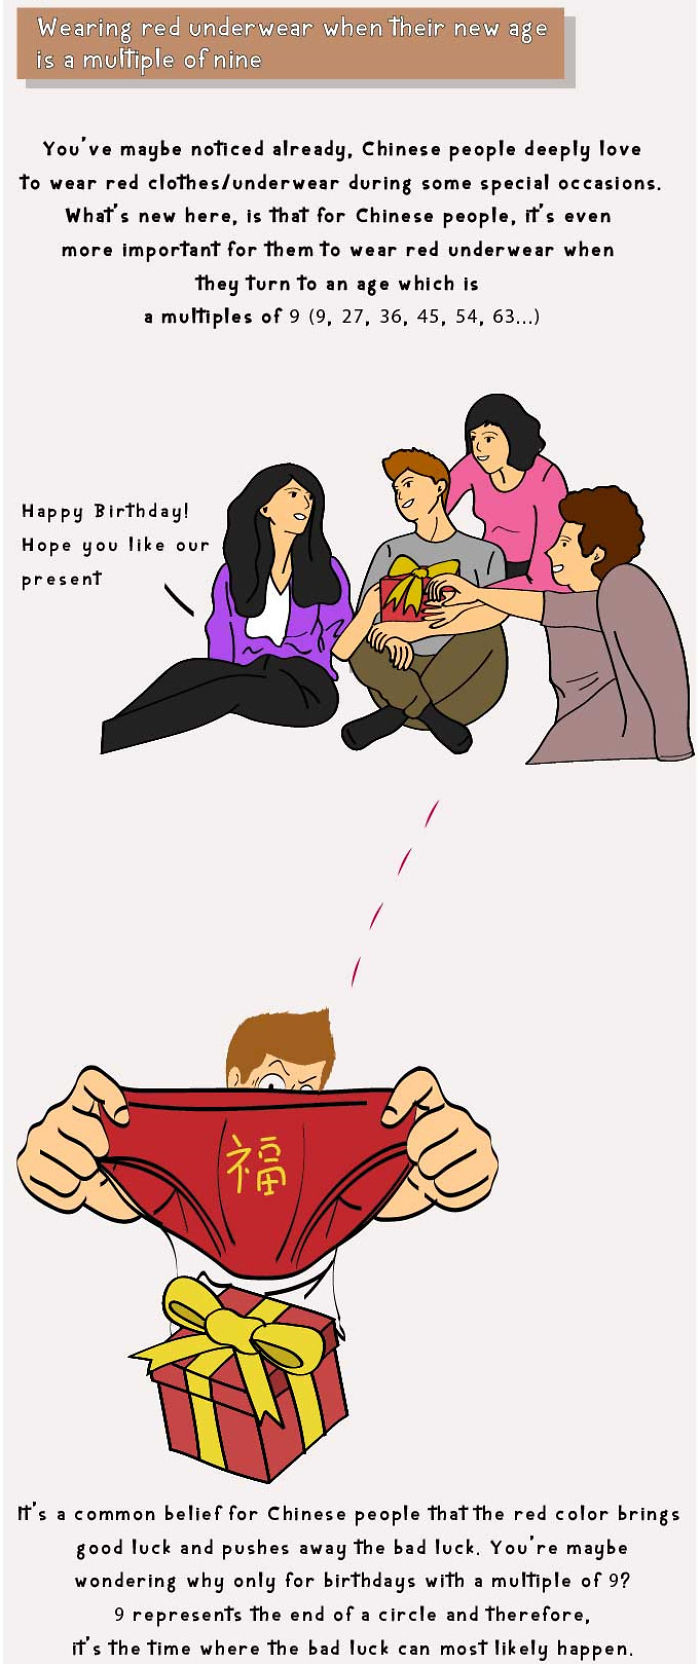 Fascon Customer Service - 🇹🇼Common Superstitions In Taiwan - Red underwear  brings good luck. Red is an important color in the Chinese culture and a  symbol of good fortune and joy. Many